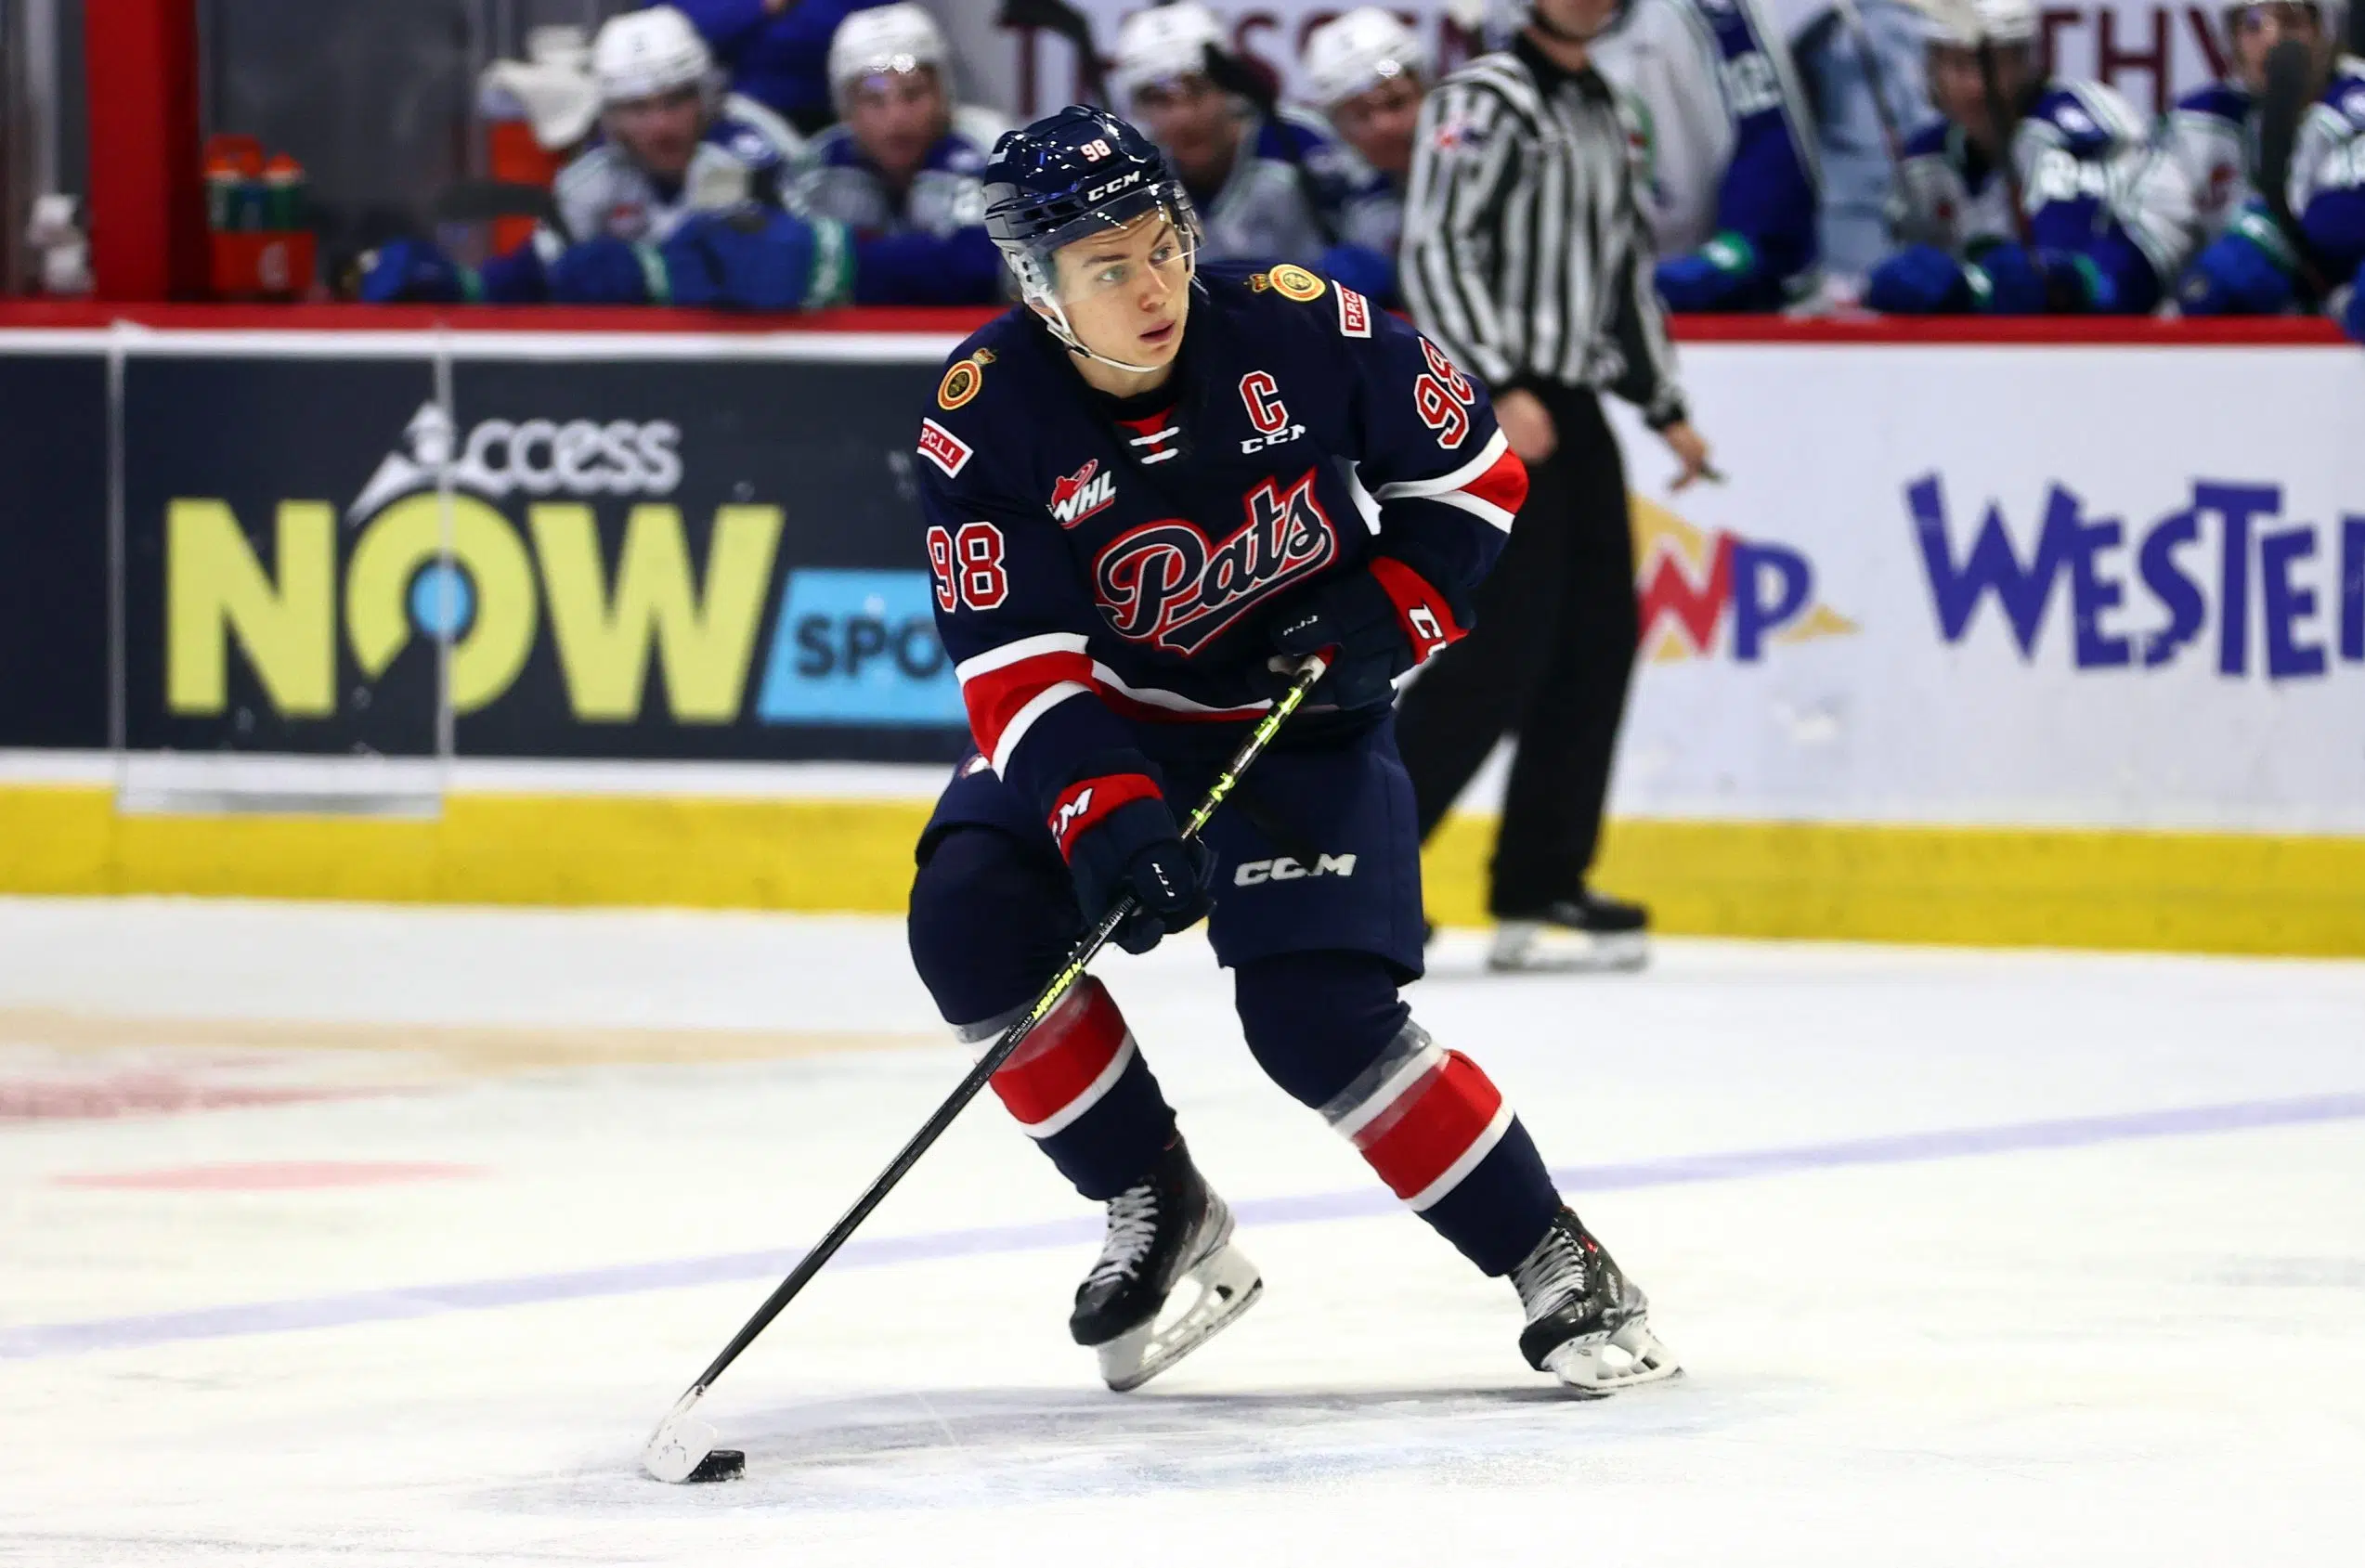 Pats' Bedard claims second straight monthly award from WHL